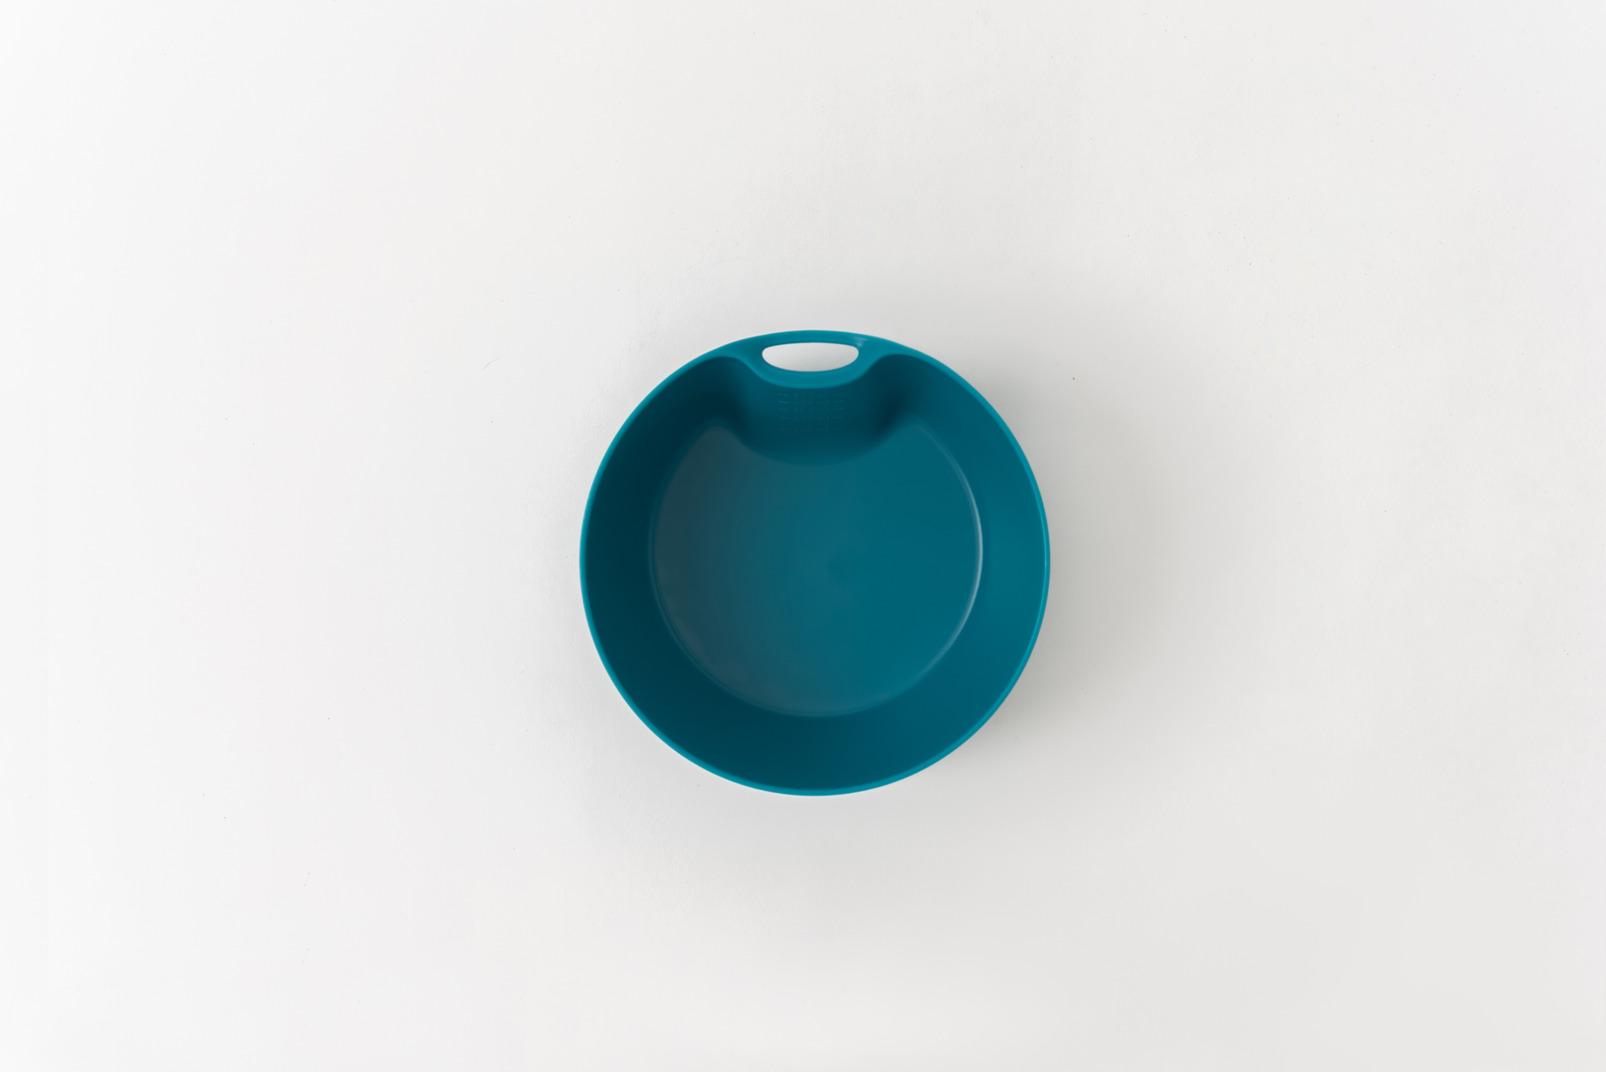 Blue plate on a white background